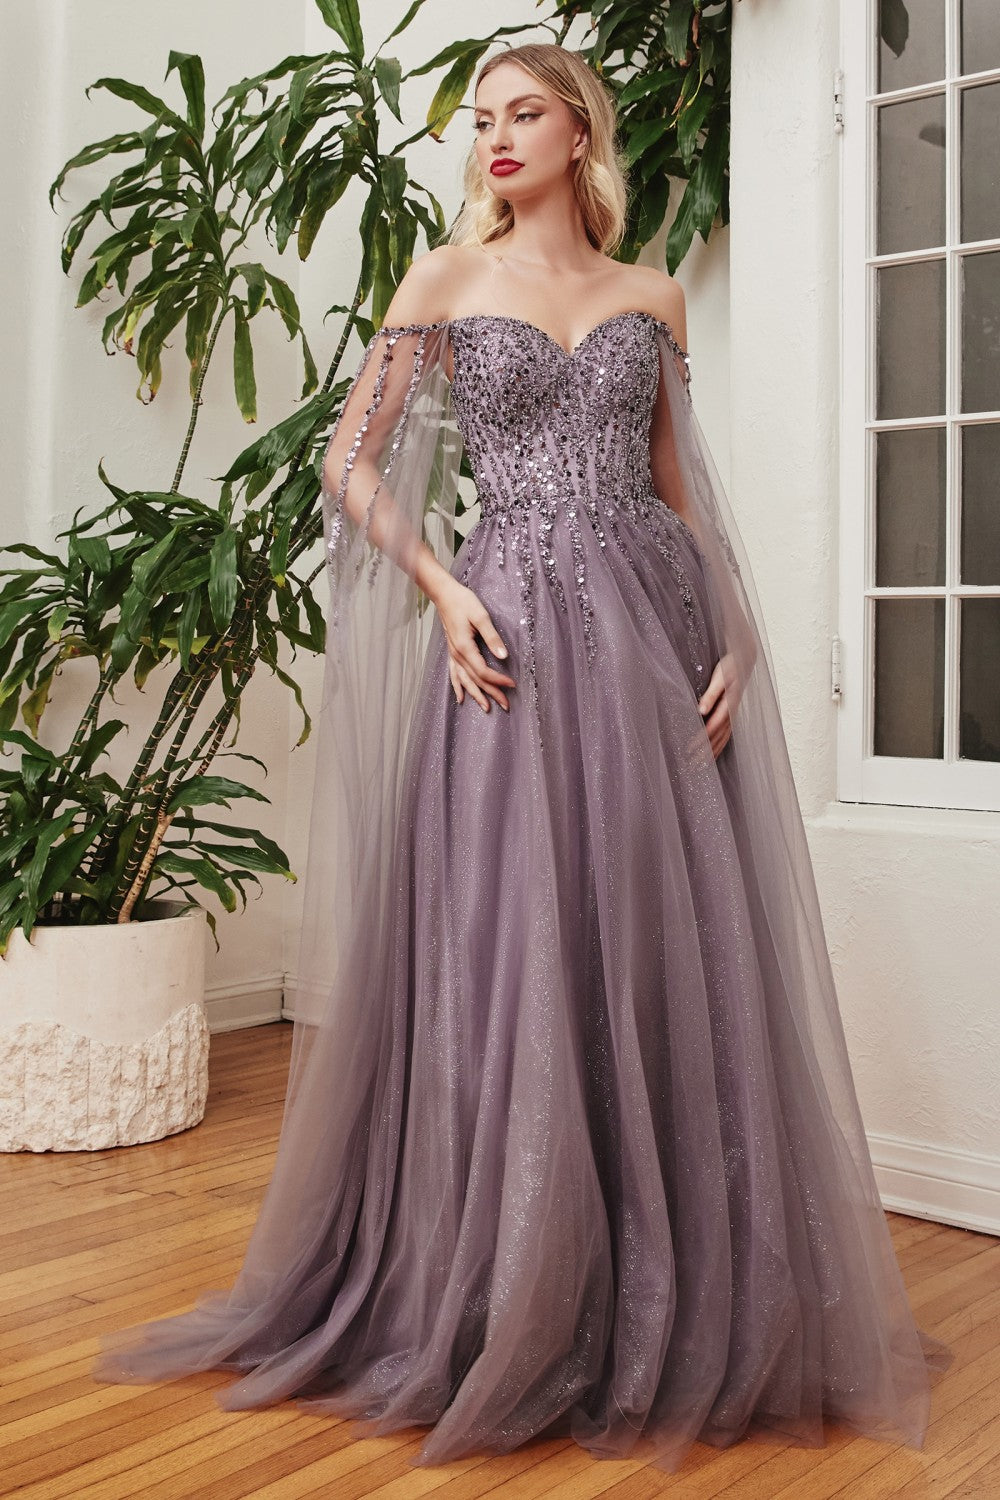 English-violet A-Line with Cape Sleeves Gown CD0204 - Women Evening Formal Gown - Special Occasion-Curves